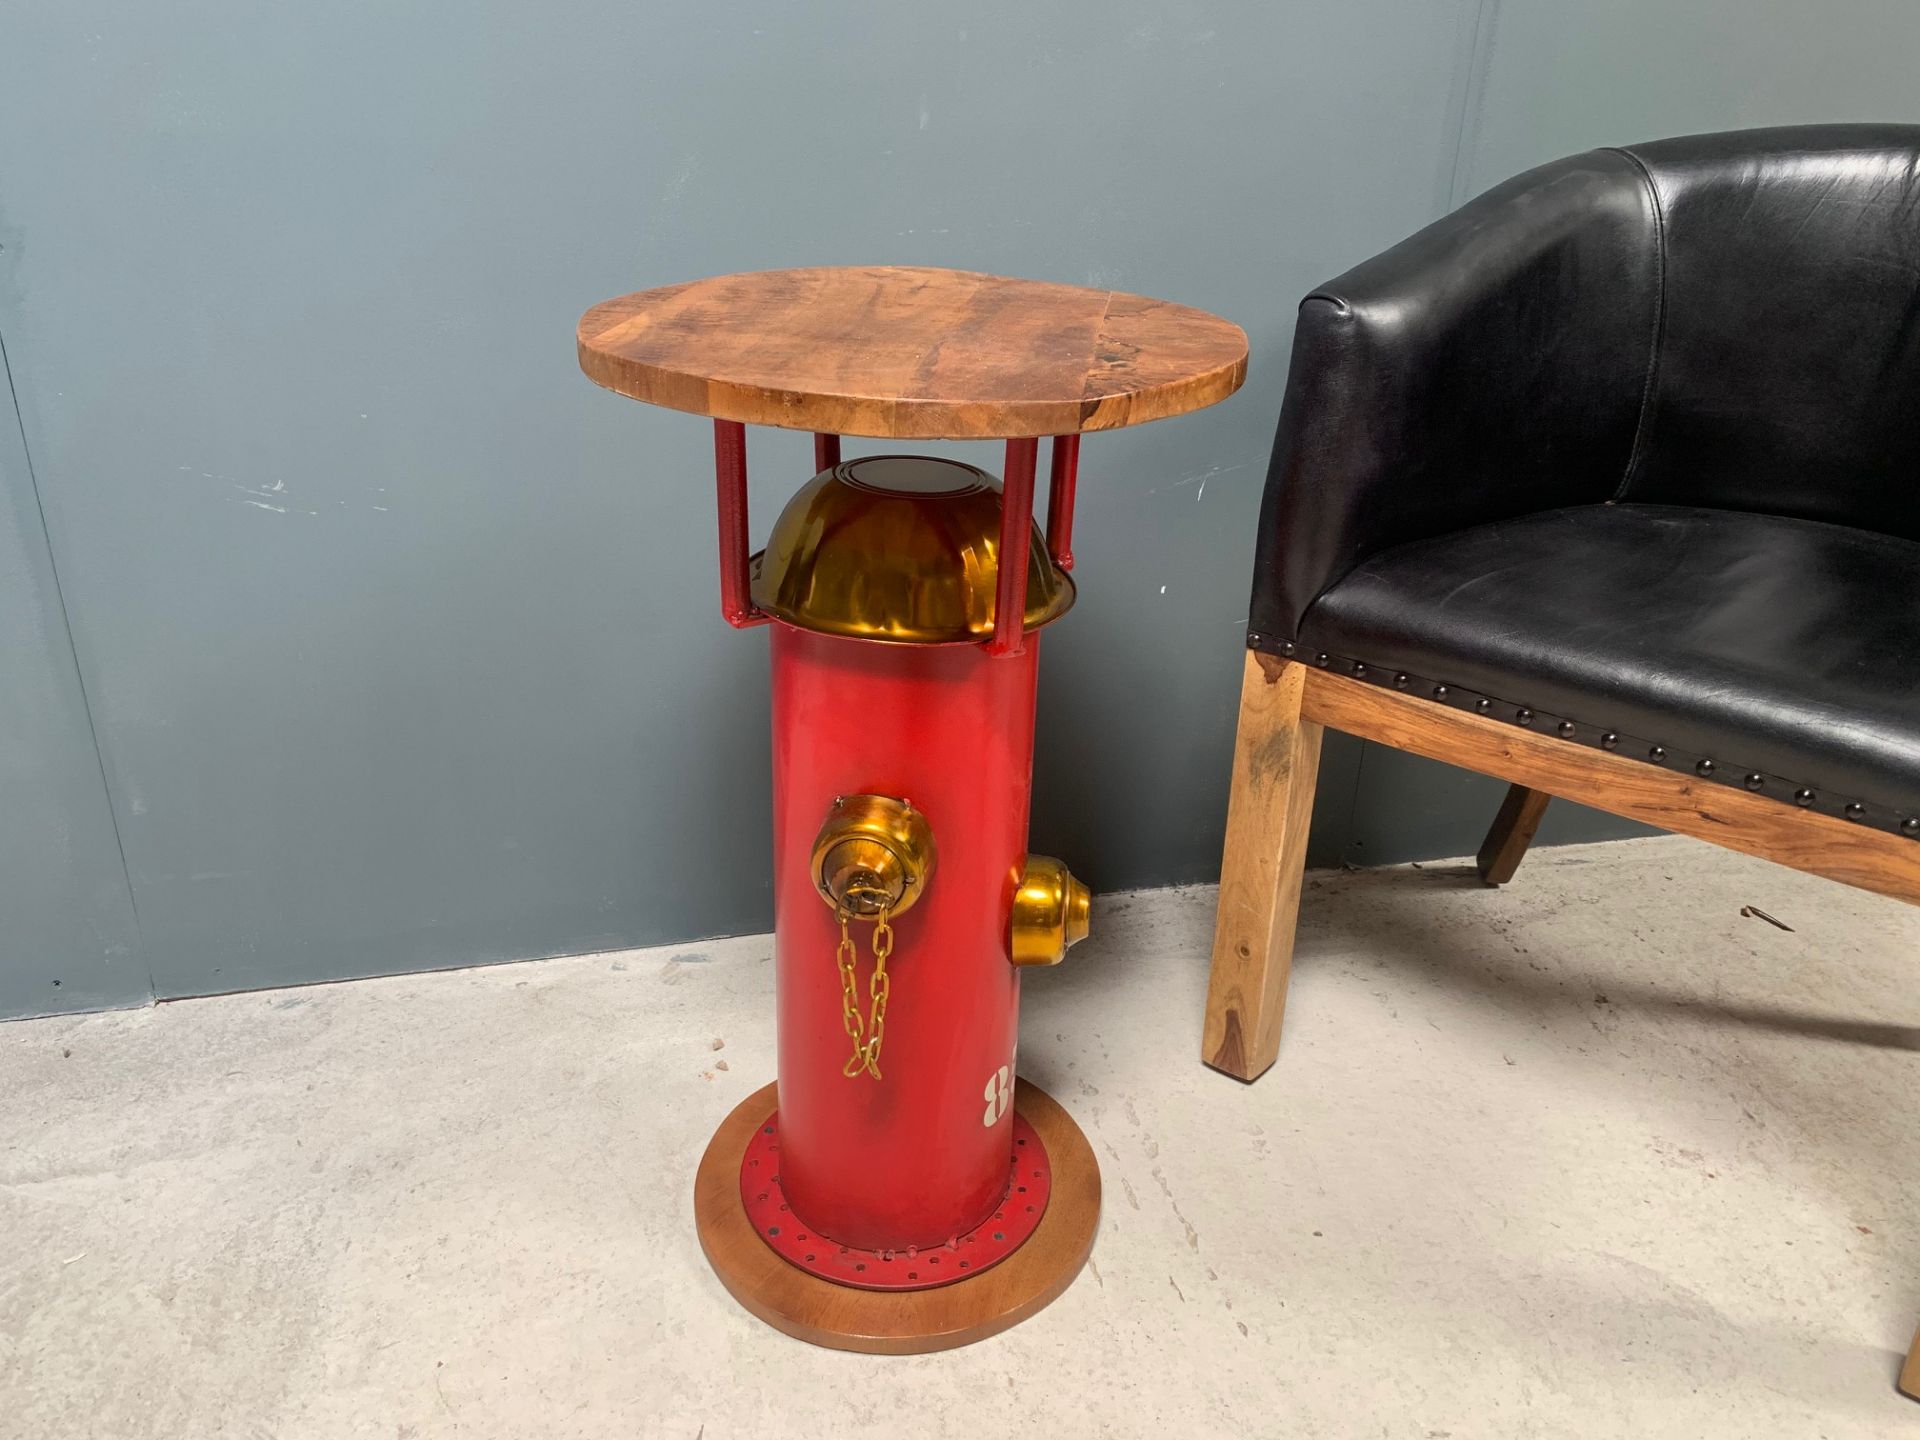 Brand New Boxed Industrial Metal Red Fire Hydrant Side Table With Wooden Top - Image 3 of 3